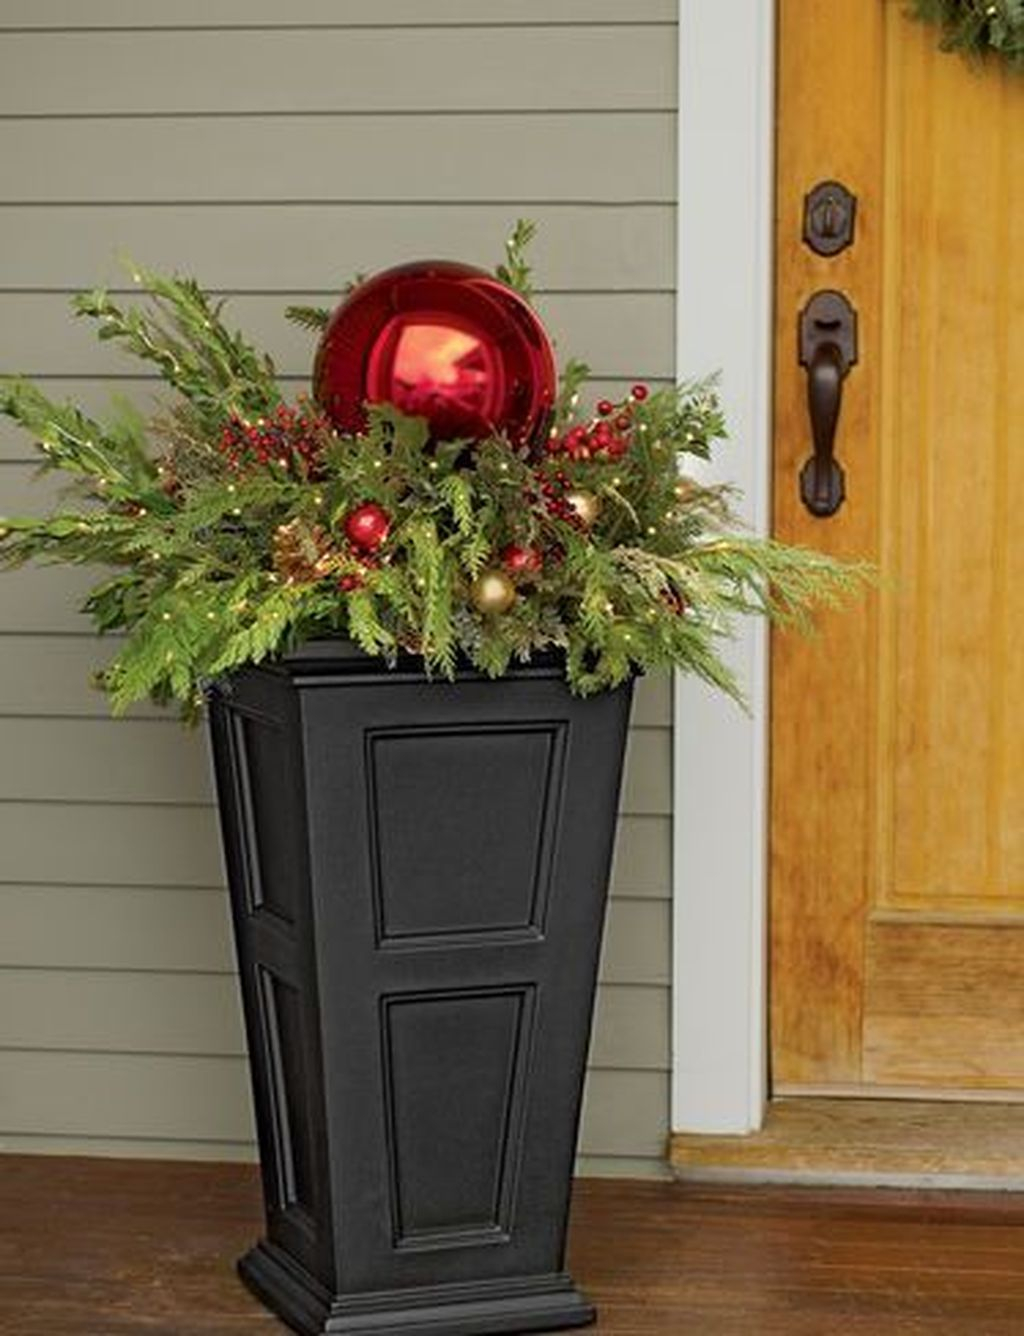 Marvelous Outdoor Holiday Planter Ideas To Beauty Porch Décor 26